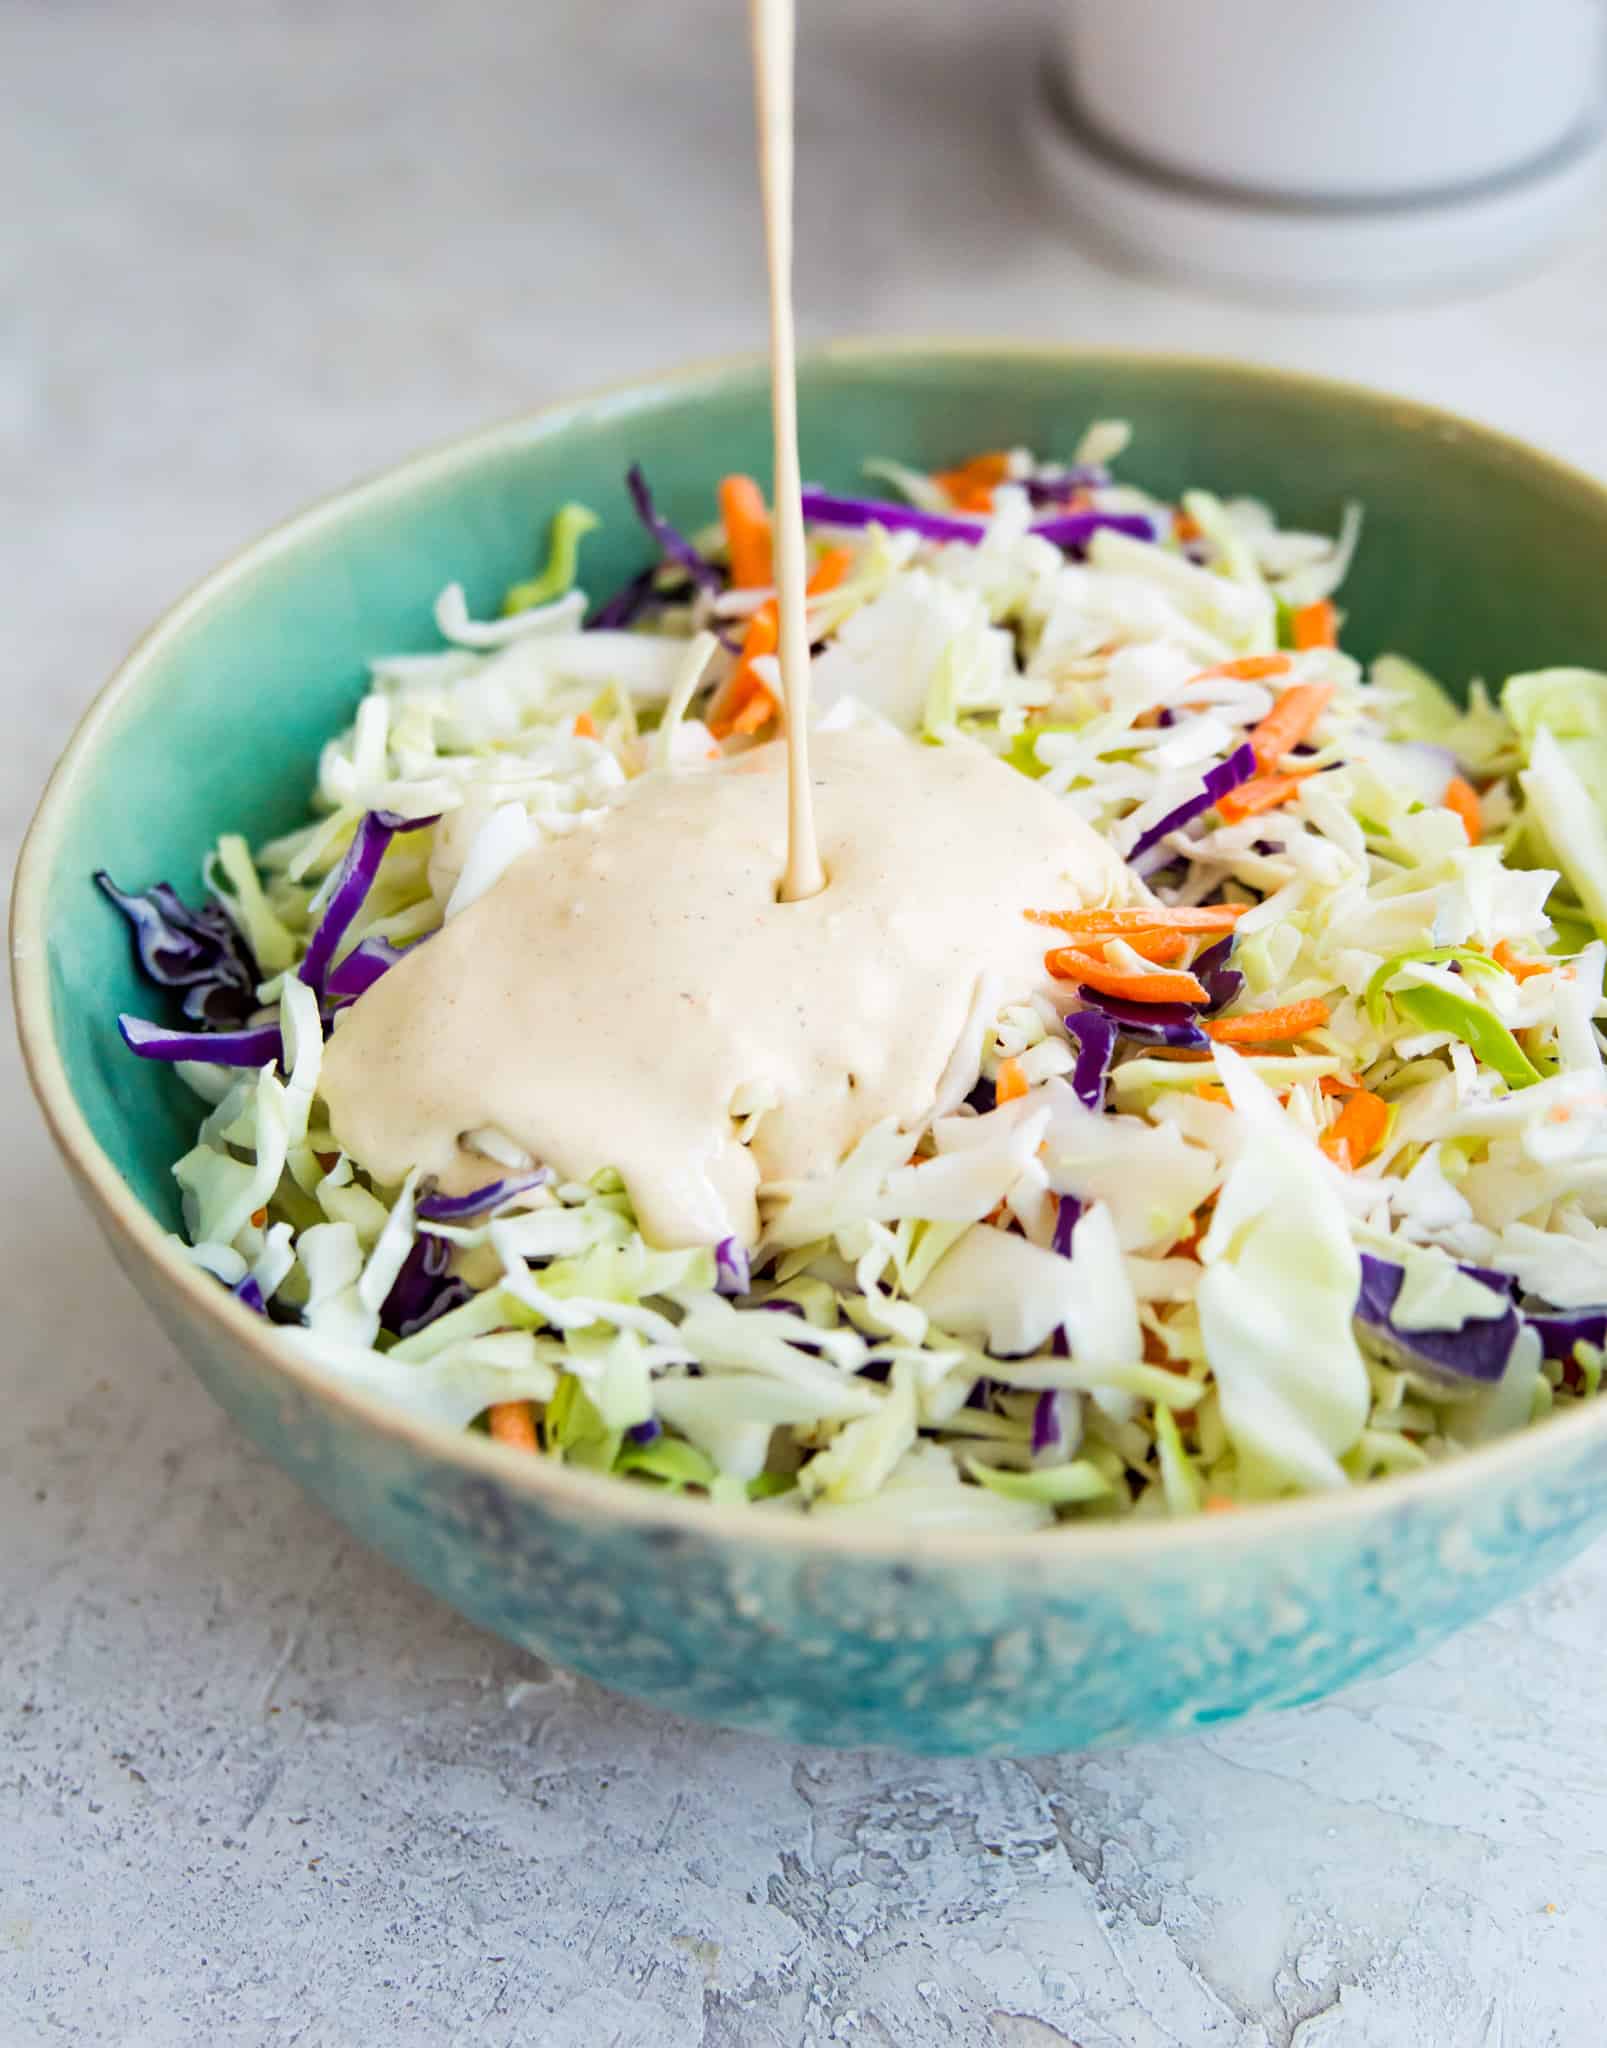 A creamy dressing being poured over a bowl of coleslaw.